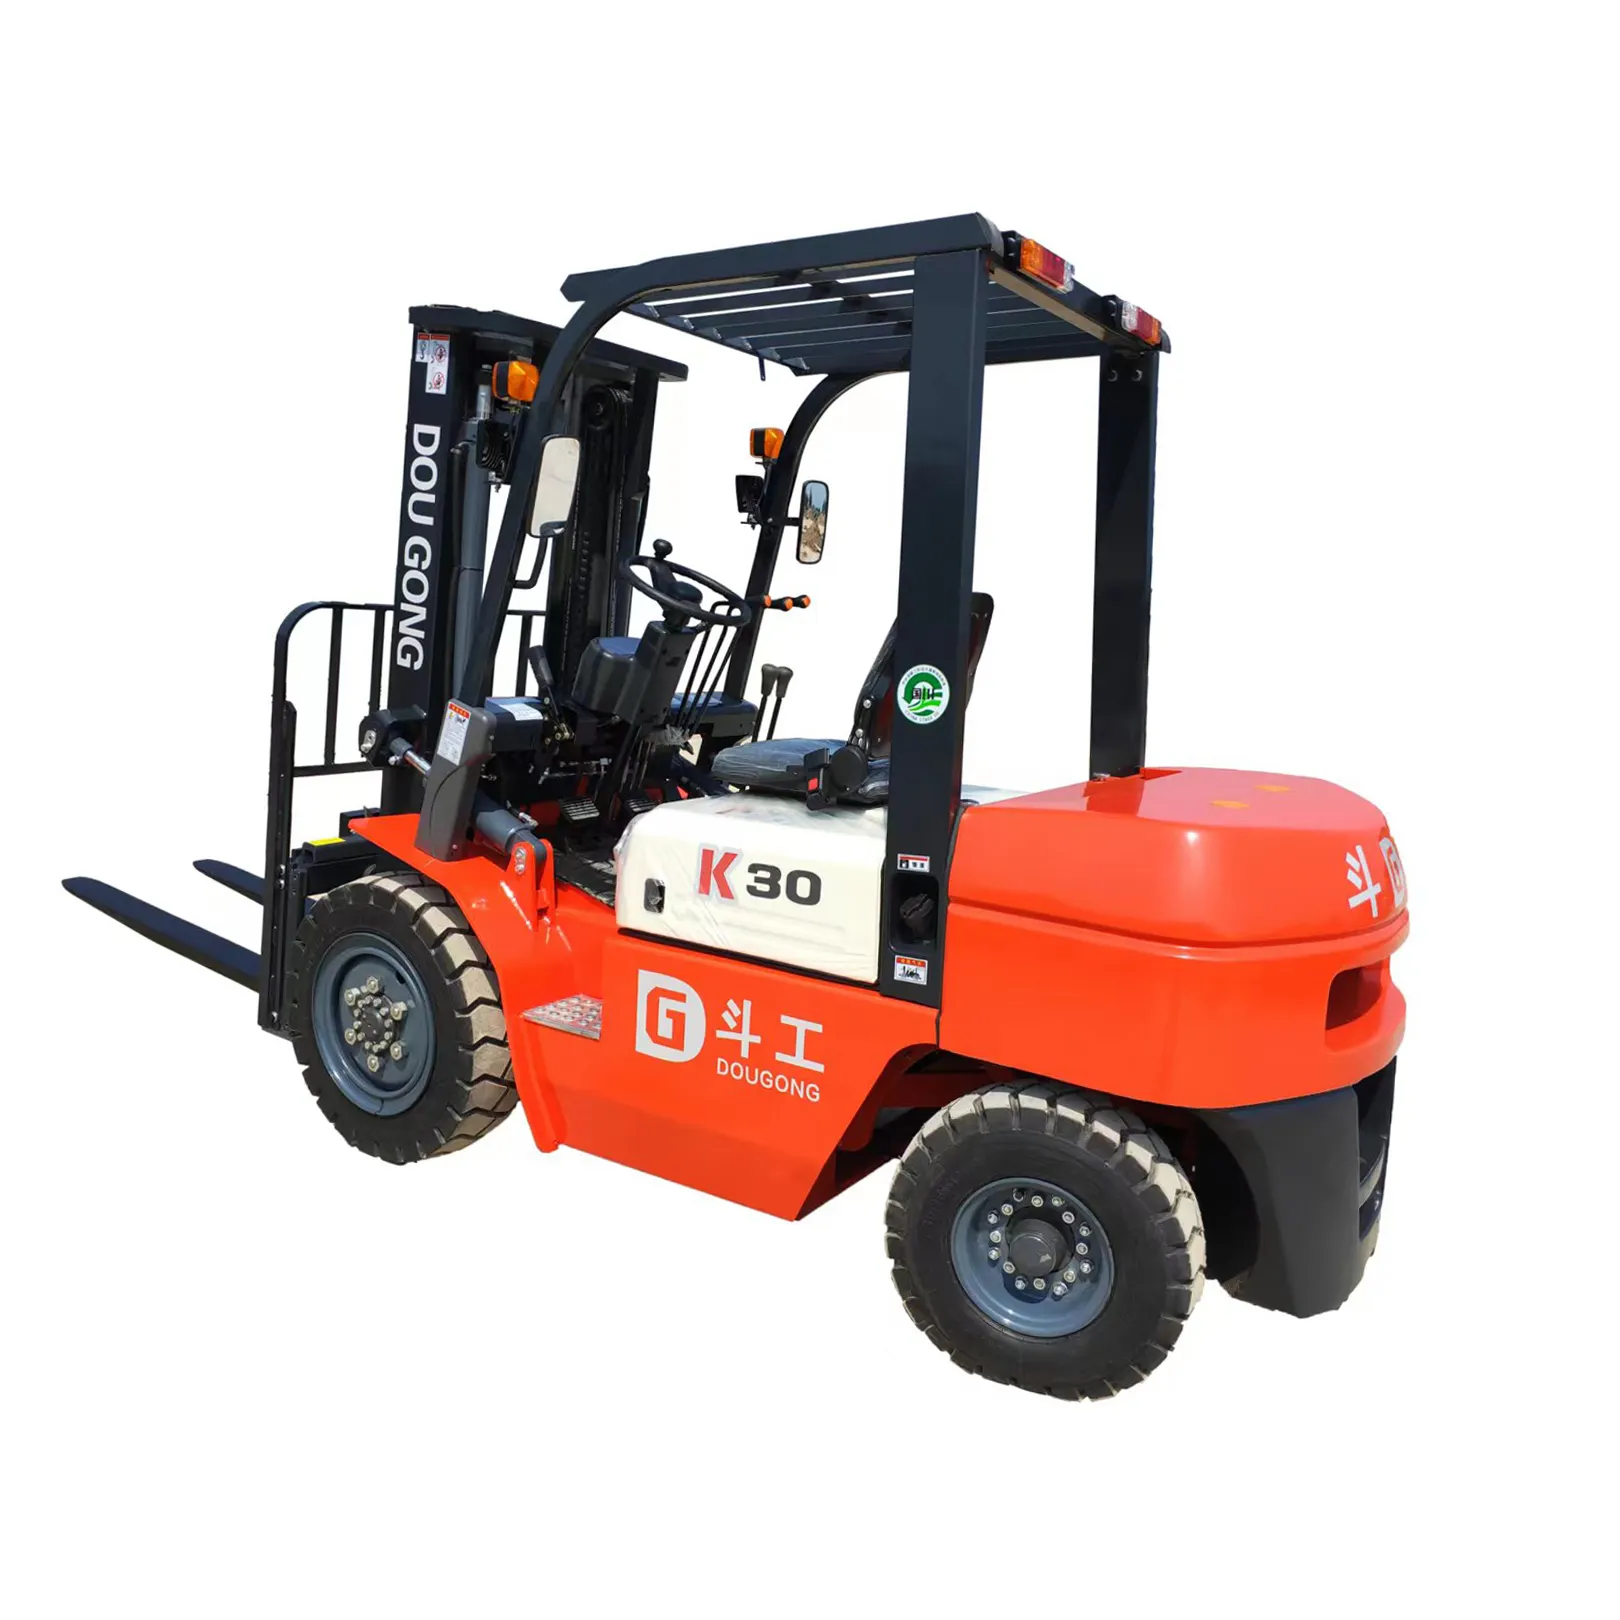 New Design Wholesale Diesel Rough Terrain Tires Battery for Manual price Trucks parts 3.5 ton Forklift Made in China